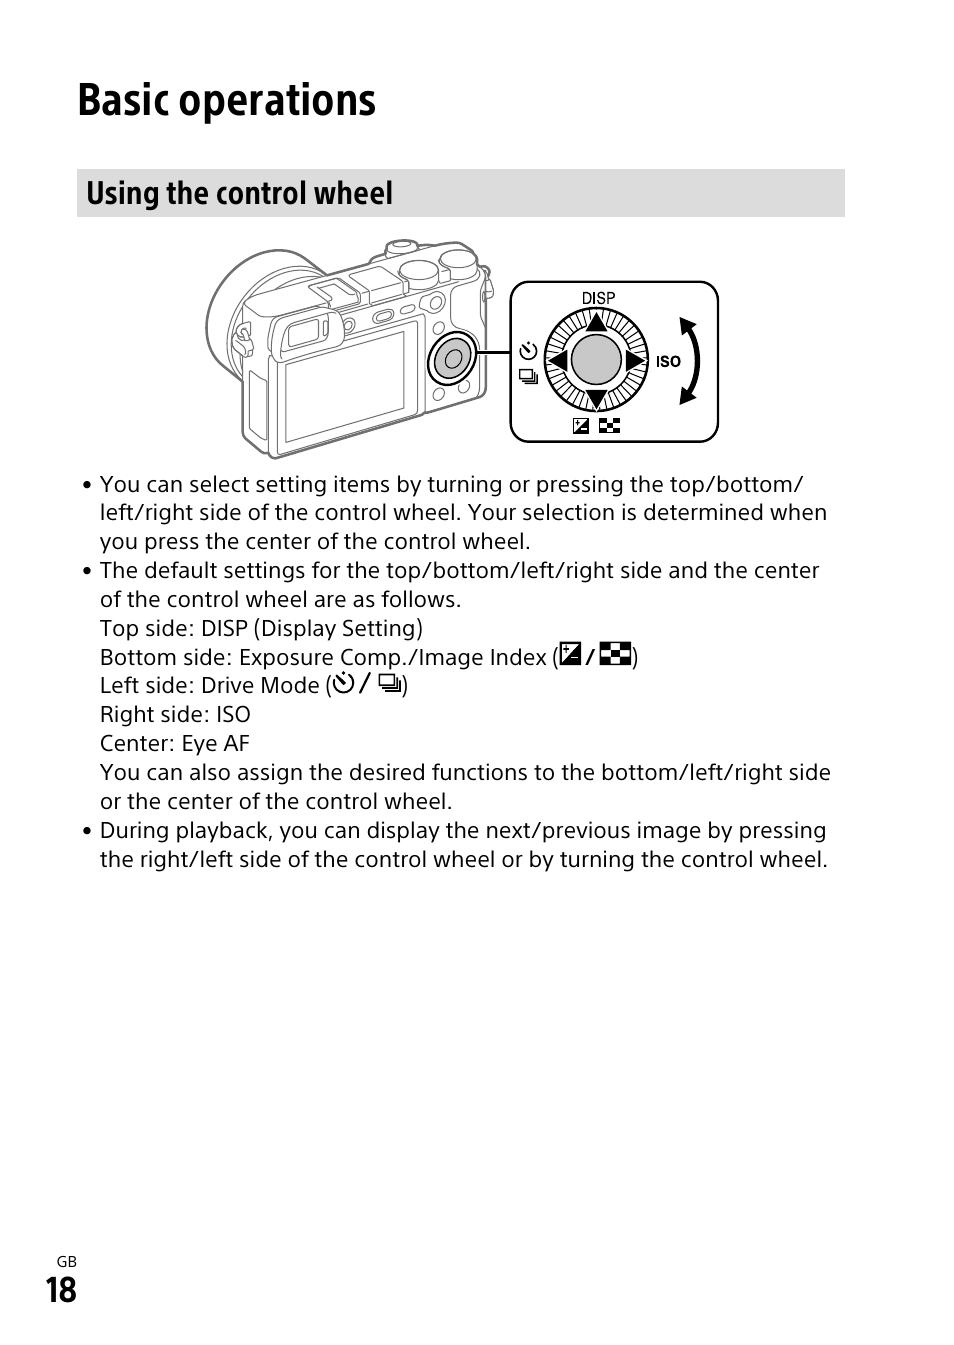 Basic operations, Using the control wheel | Sony α6500 ILCE-6500 User Manual | Page 18 / 507